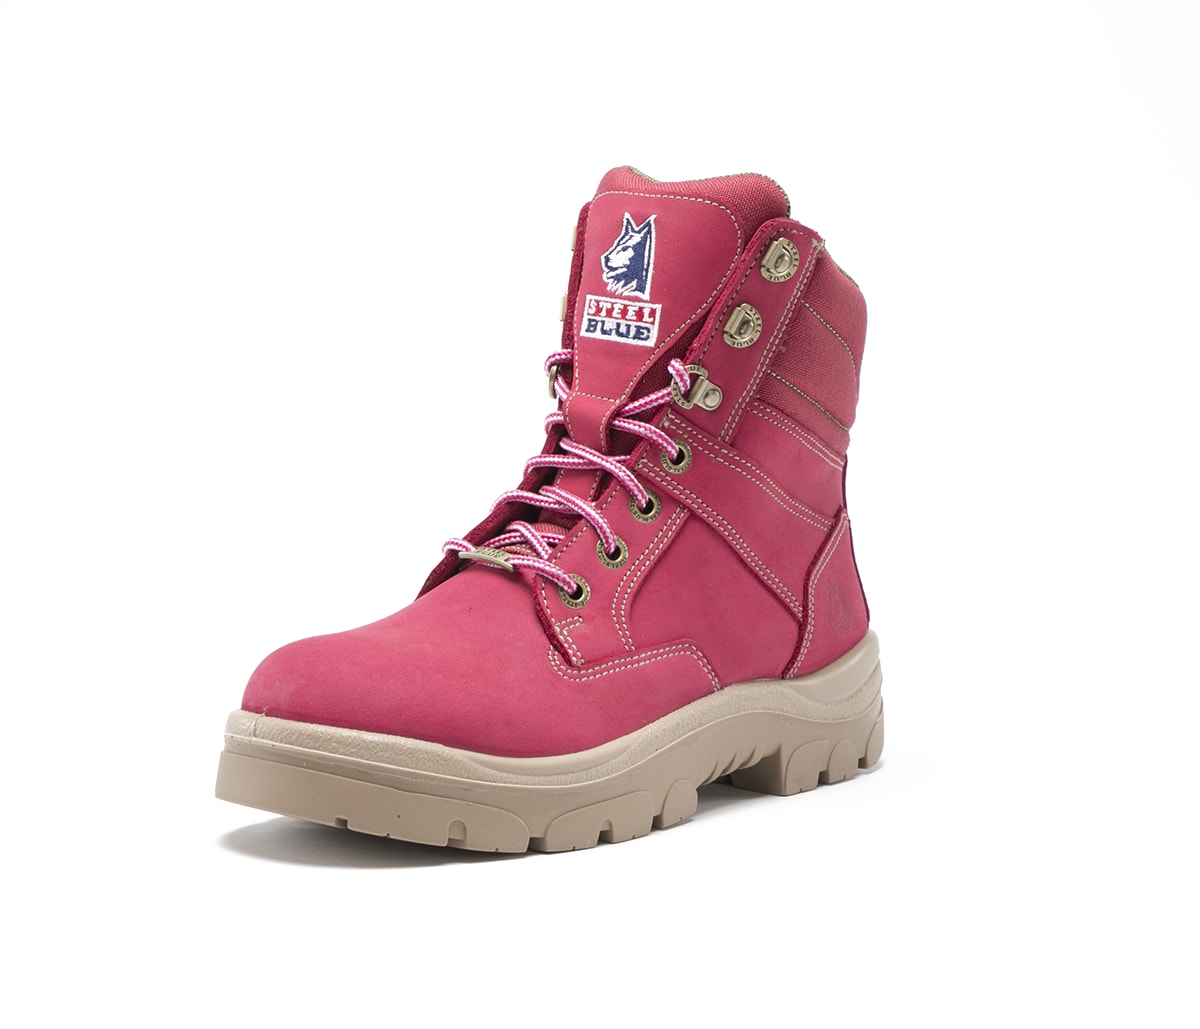 Southern Cross® Zip Ladies Boots - Pink